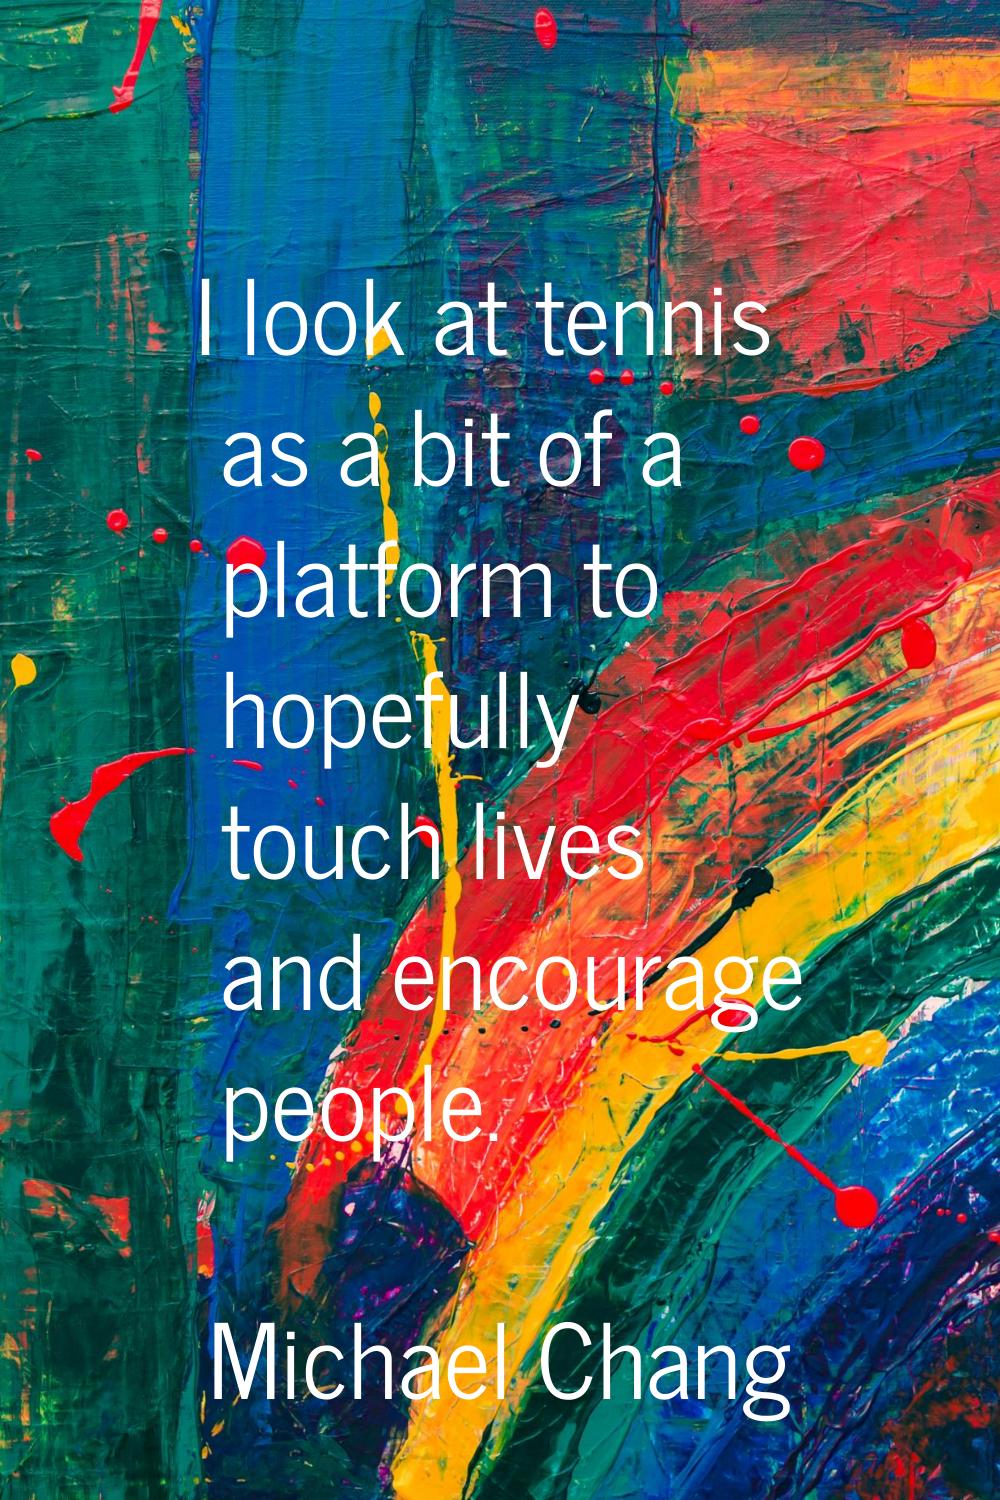 I look at tennis as a bit of a platform to hopefully touch lives and encourage people.